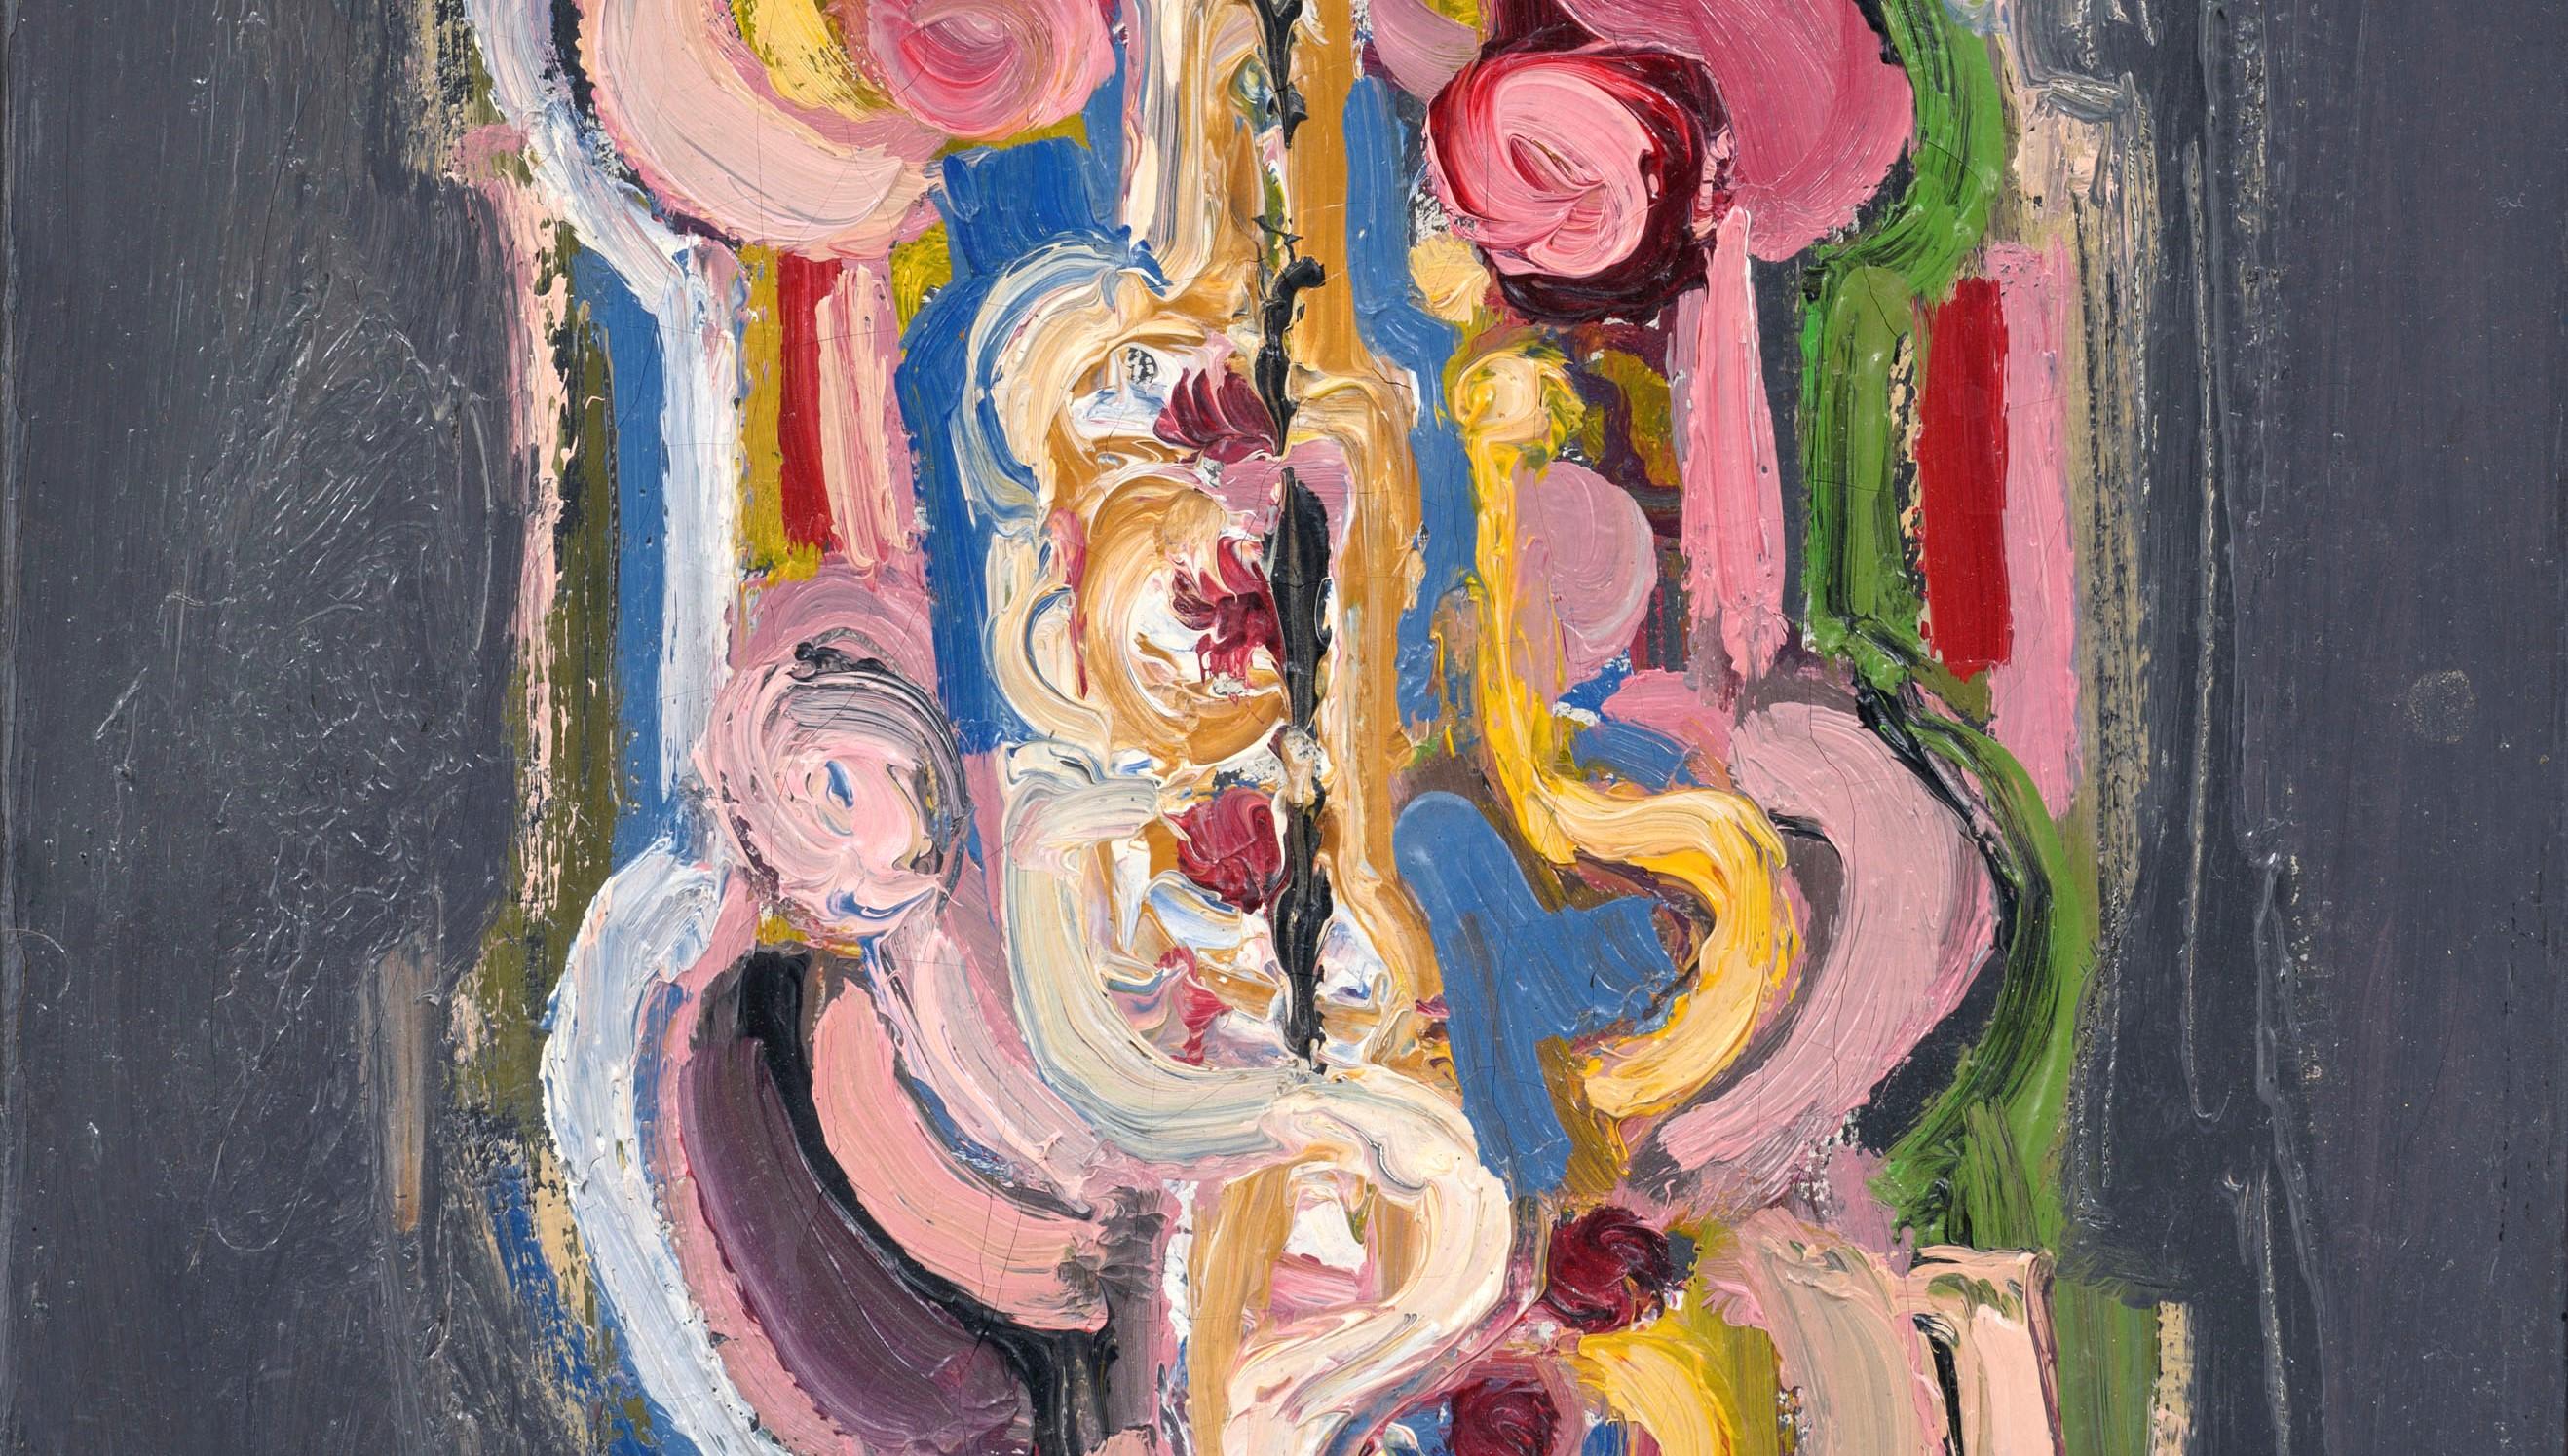 Corps nu et rose, Corneille, 1955 (Modernist Abstract Painting) For Sale 1